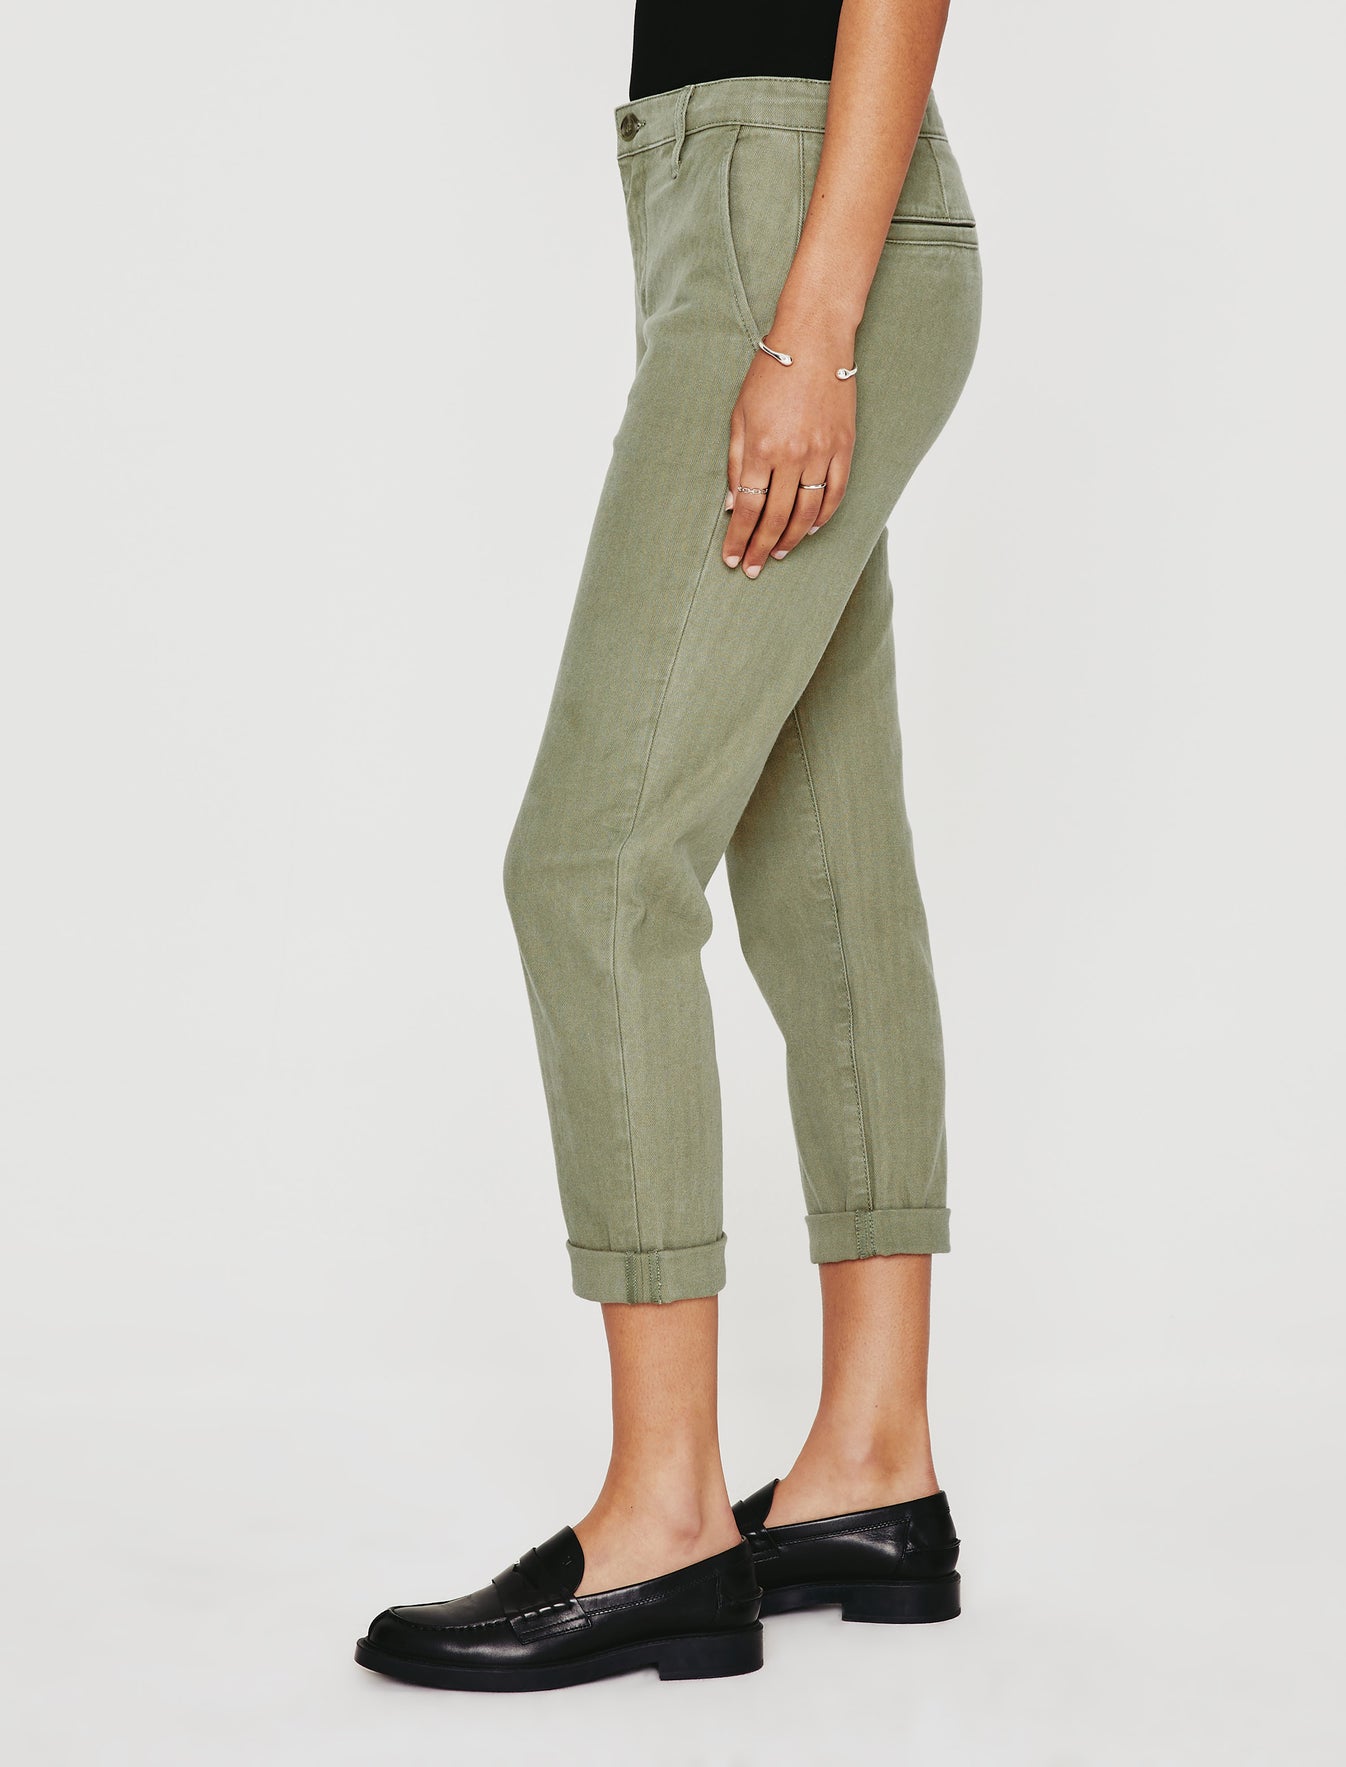 Womens Ryleigh Jumpsuit Sulfur Cavalry Sage at AG Jeans Official Store